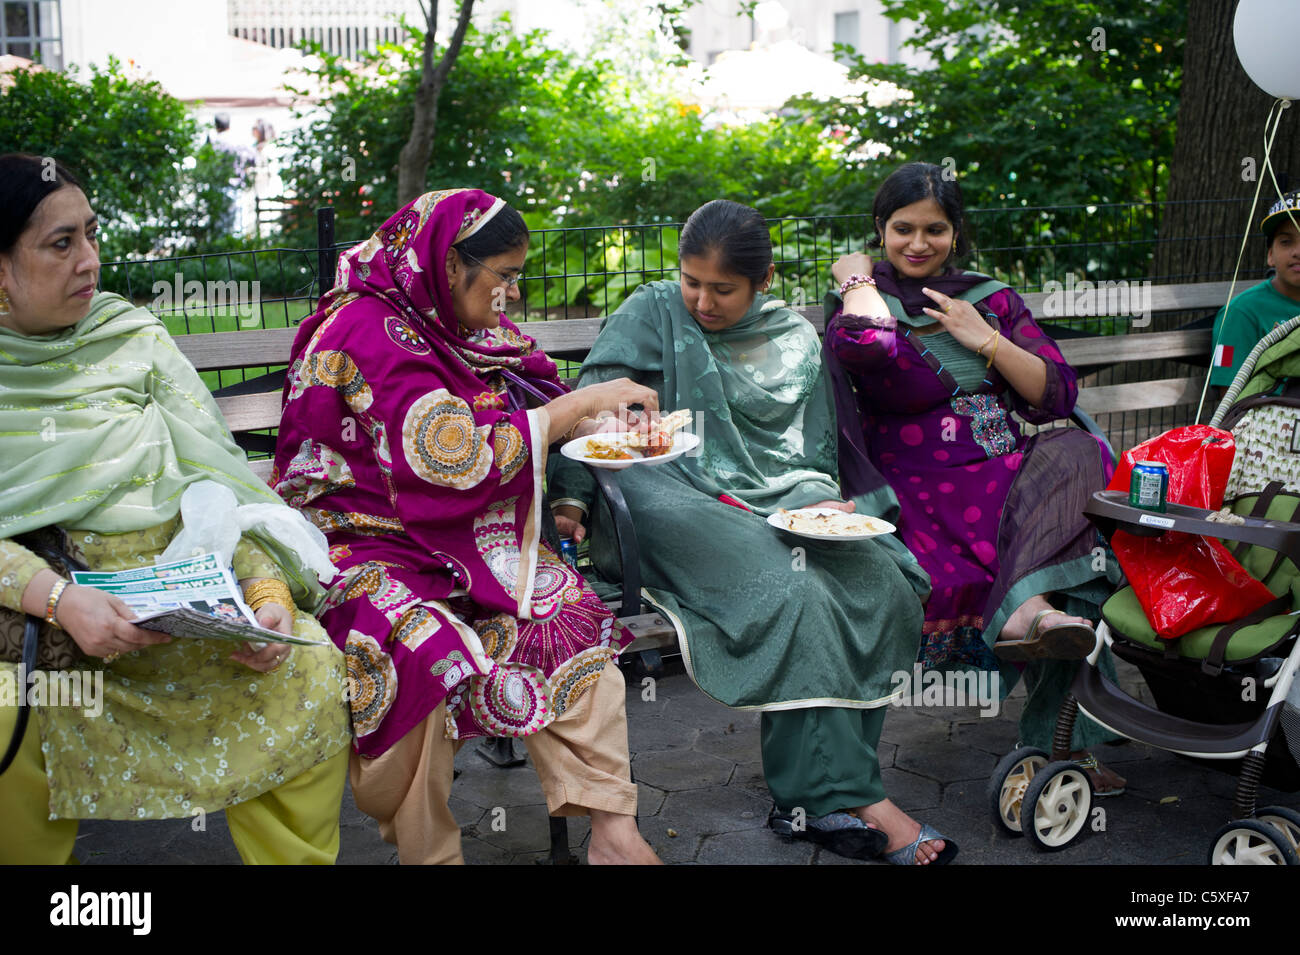 Pakistani-Americans gather in Madison Square Park in New York Stock Photo